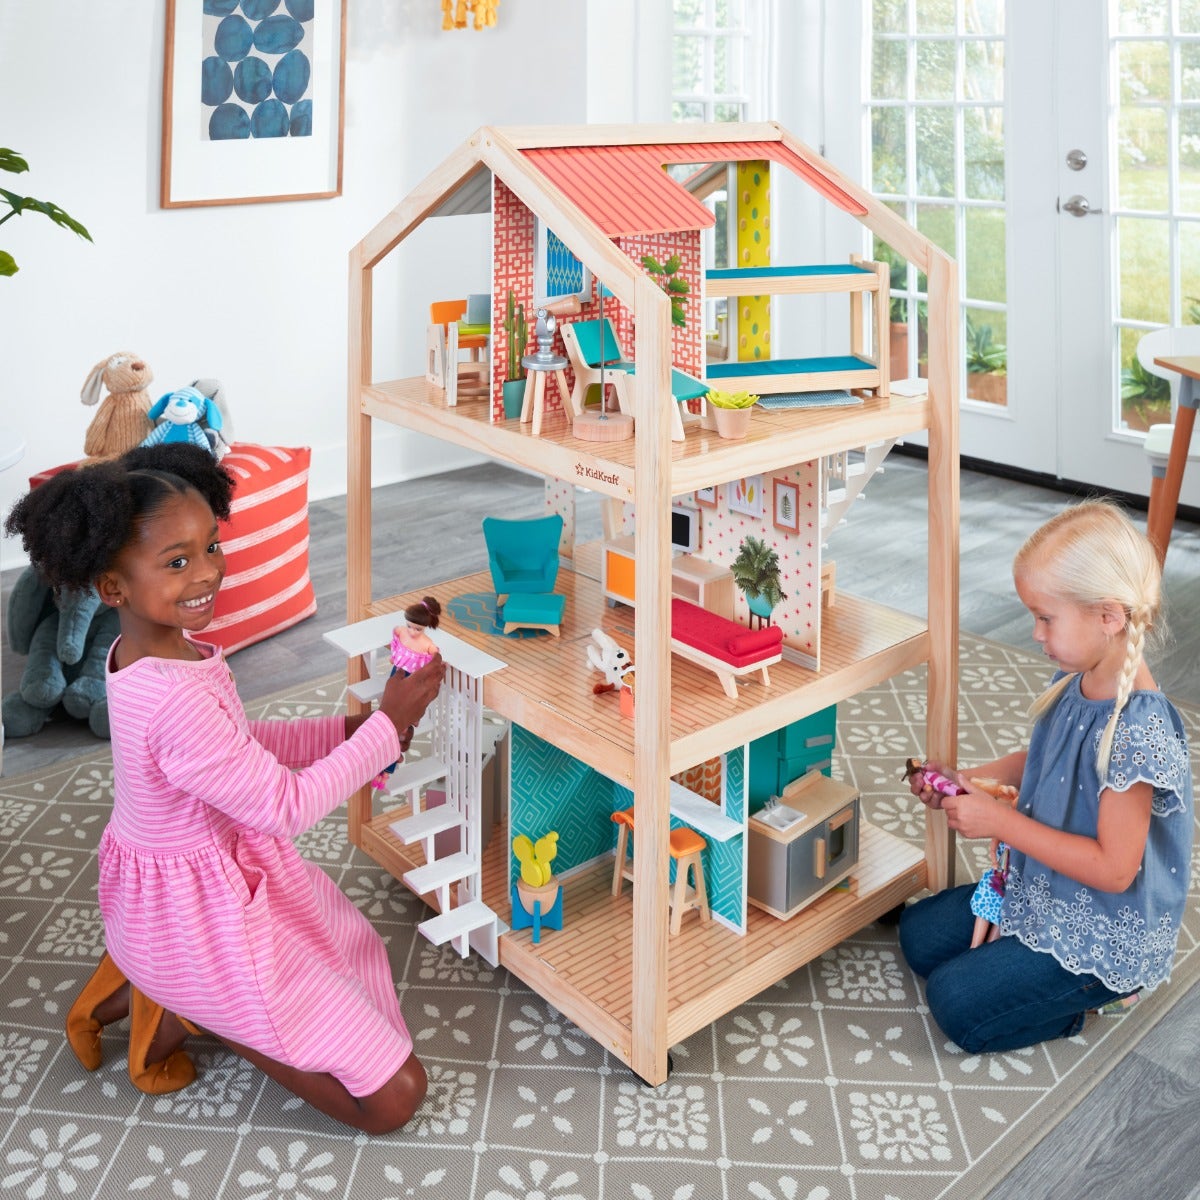 Move-in Ready: With a 42-piece furniture and play accessory set, the play can start right away. 